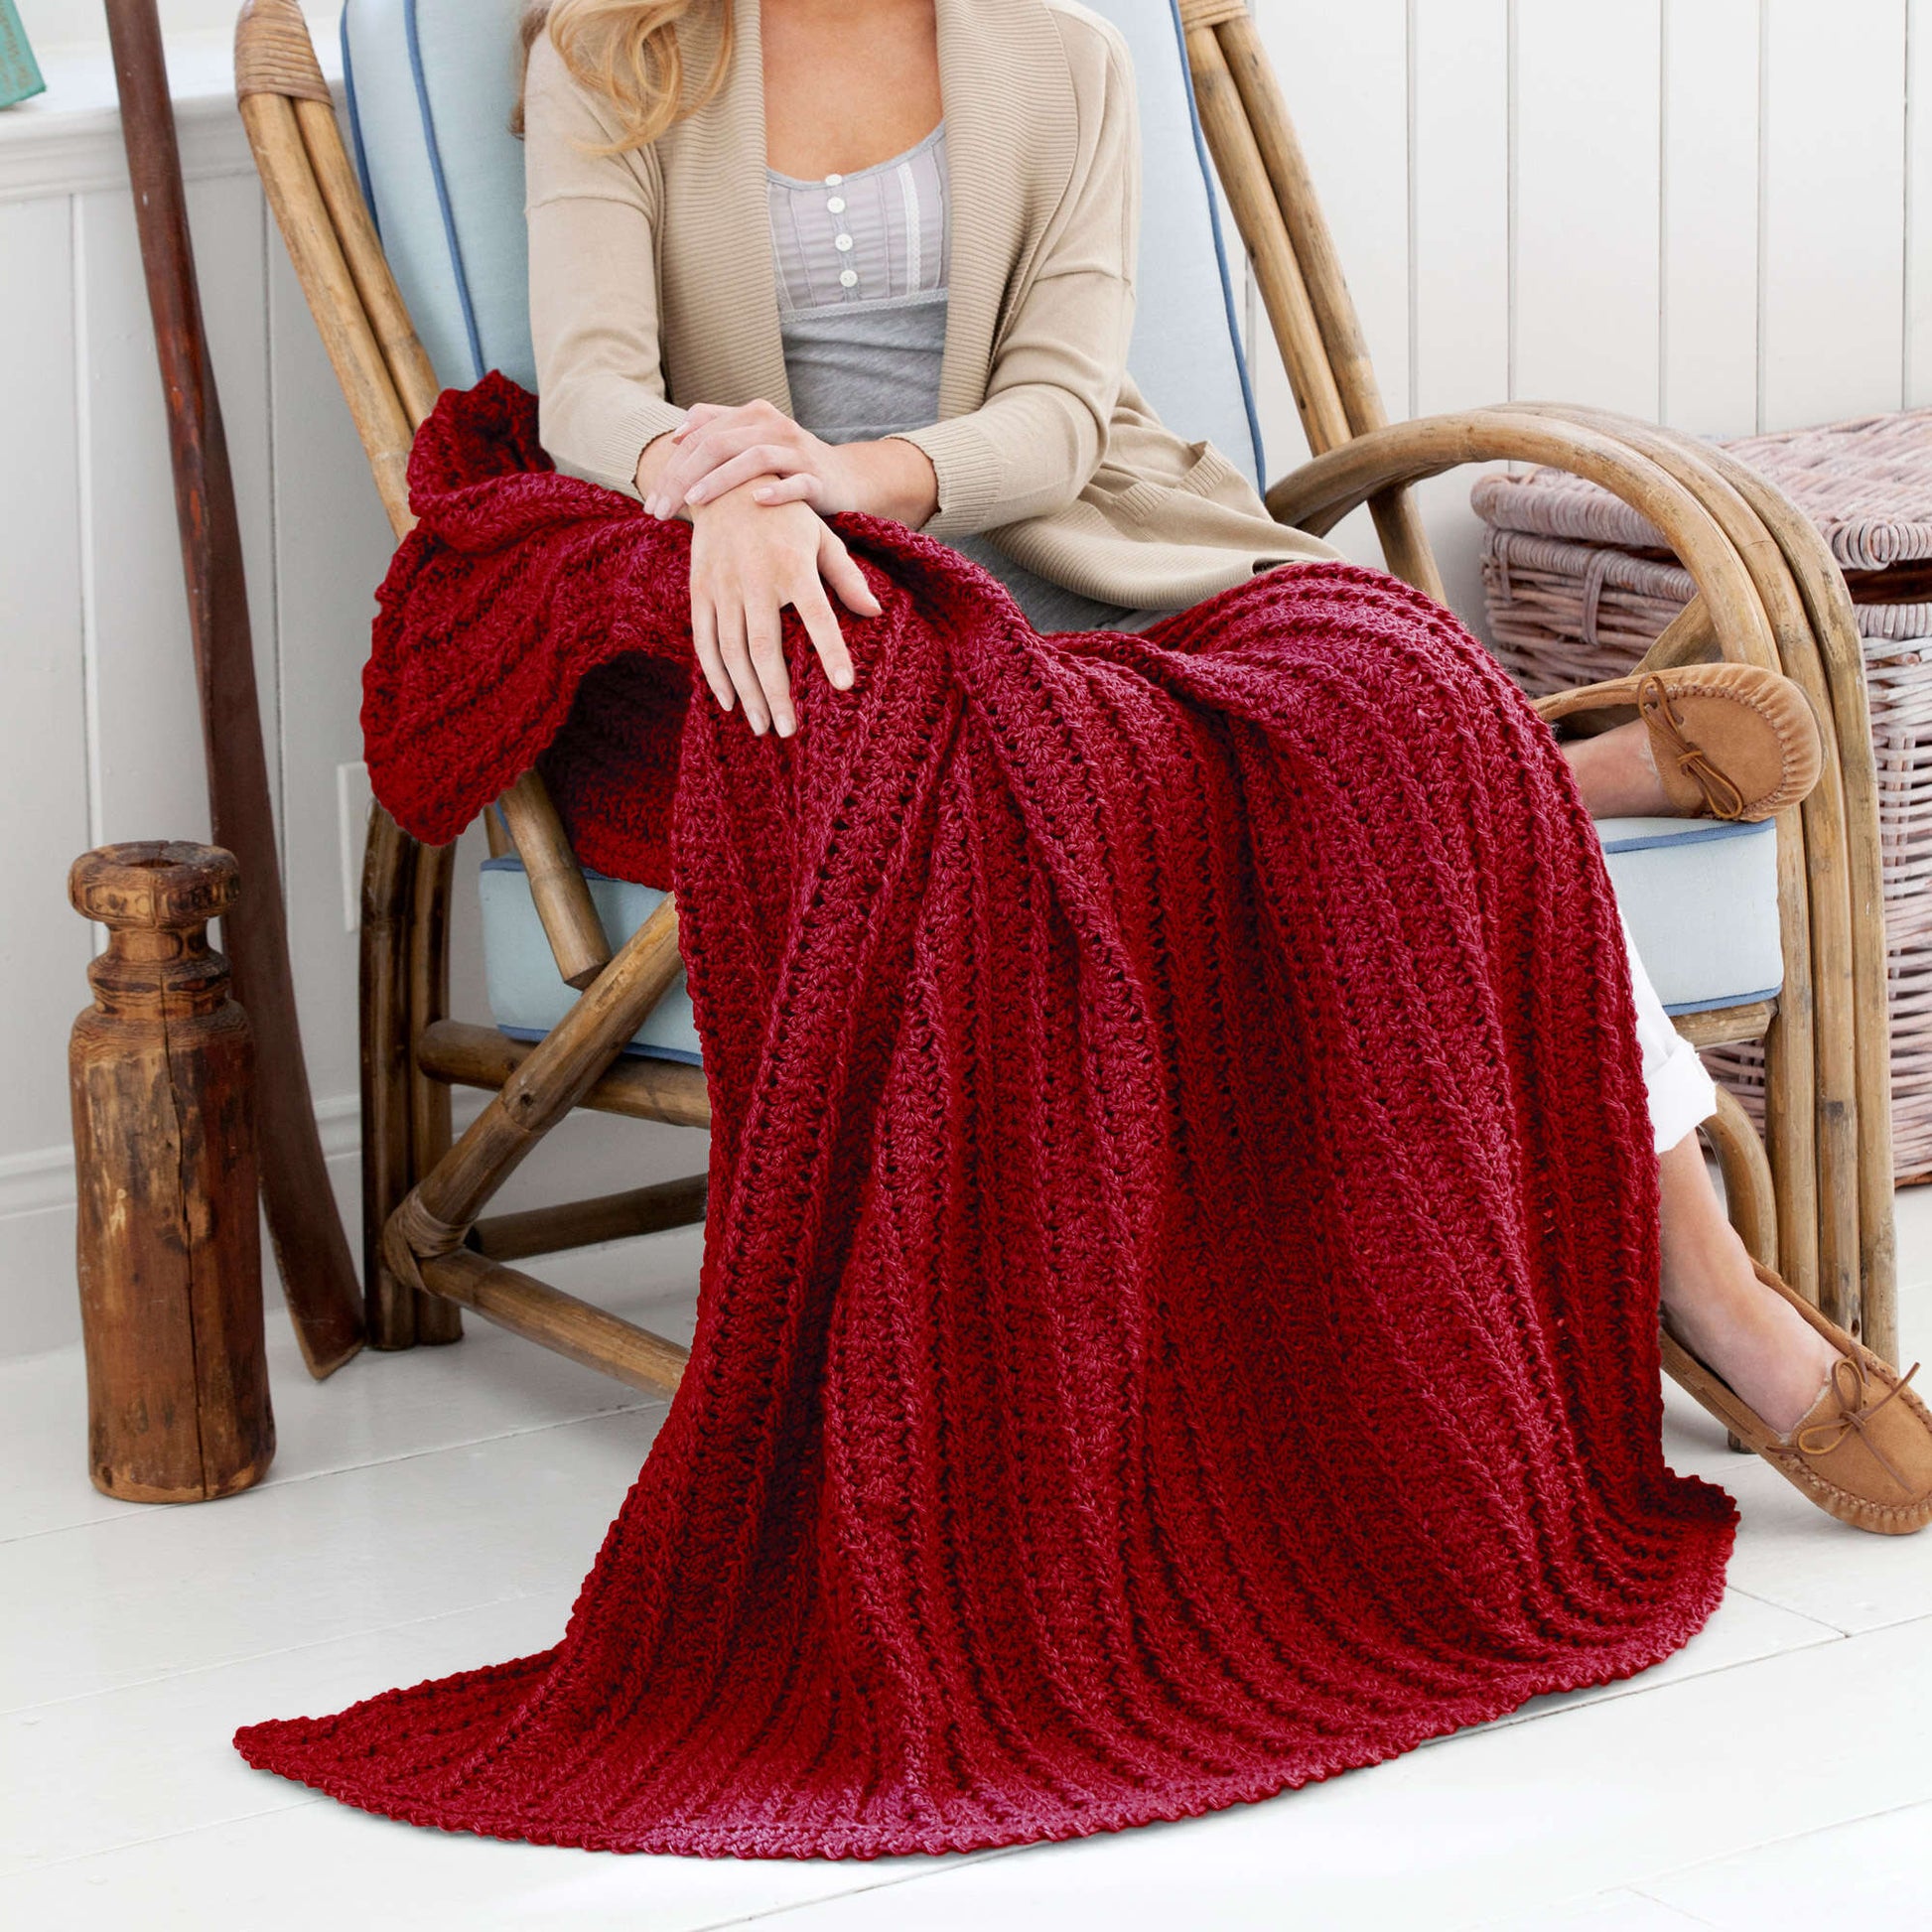 Free Red Heart Cabled And Shell Throw Crochet Pattern